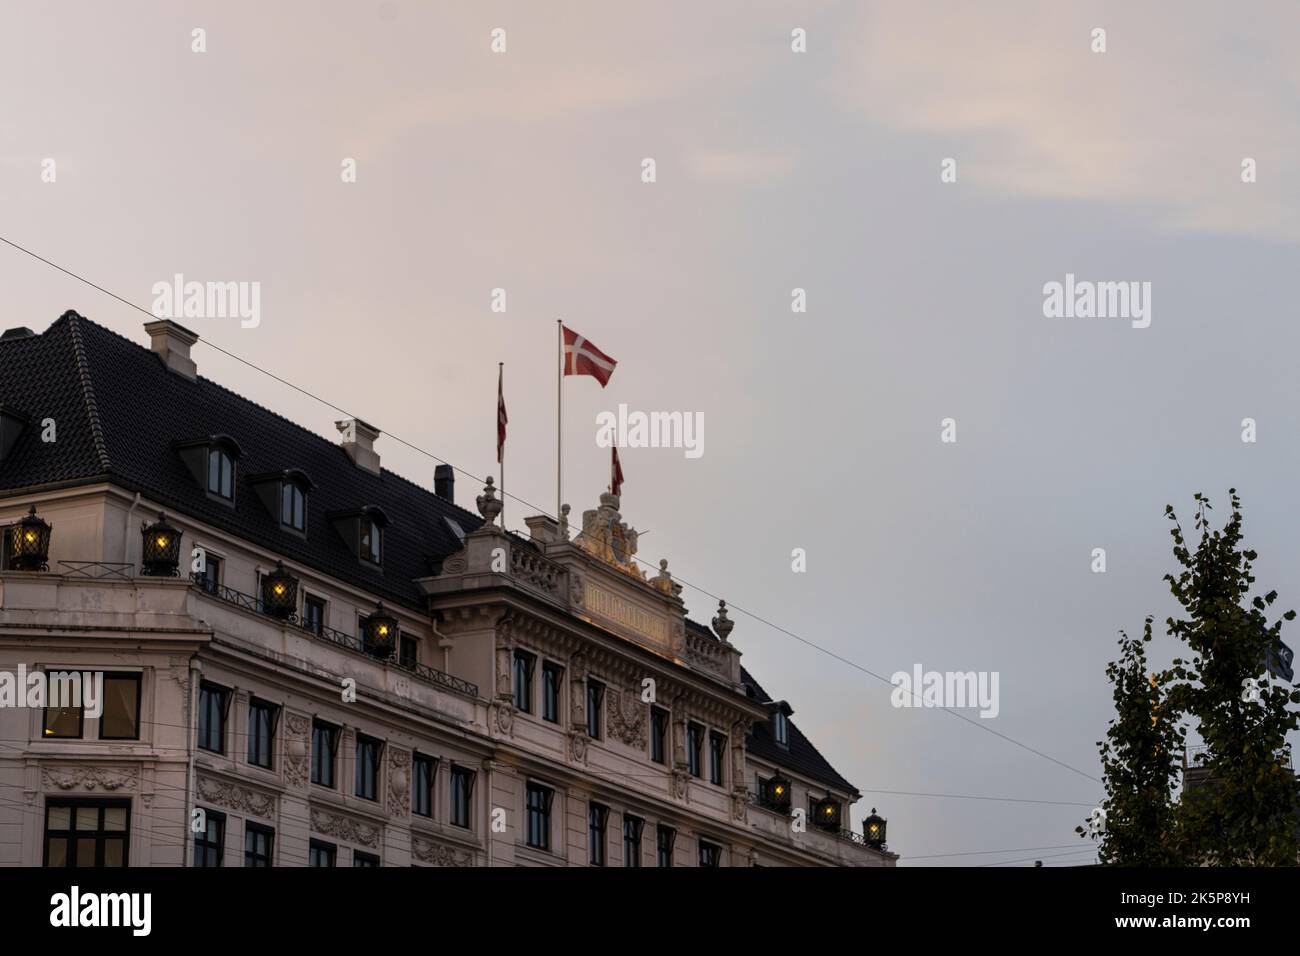 Copenhagen, Denmark. October 2022. The Danish flag flying on the roof of an ancient palace in the city center Stock Photo